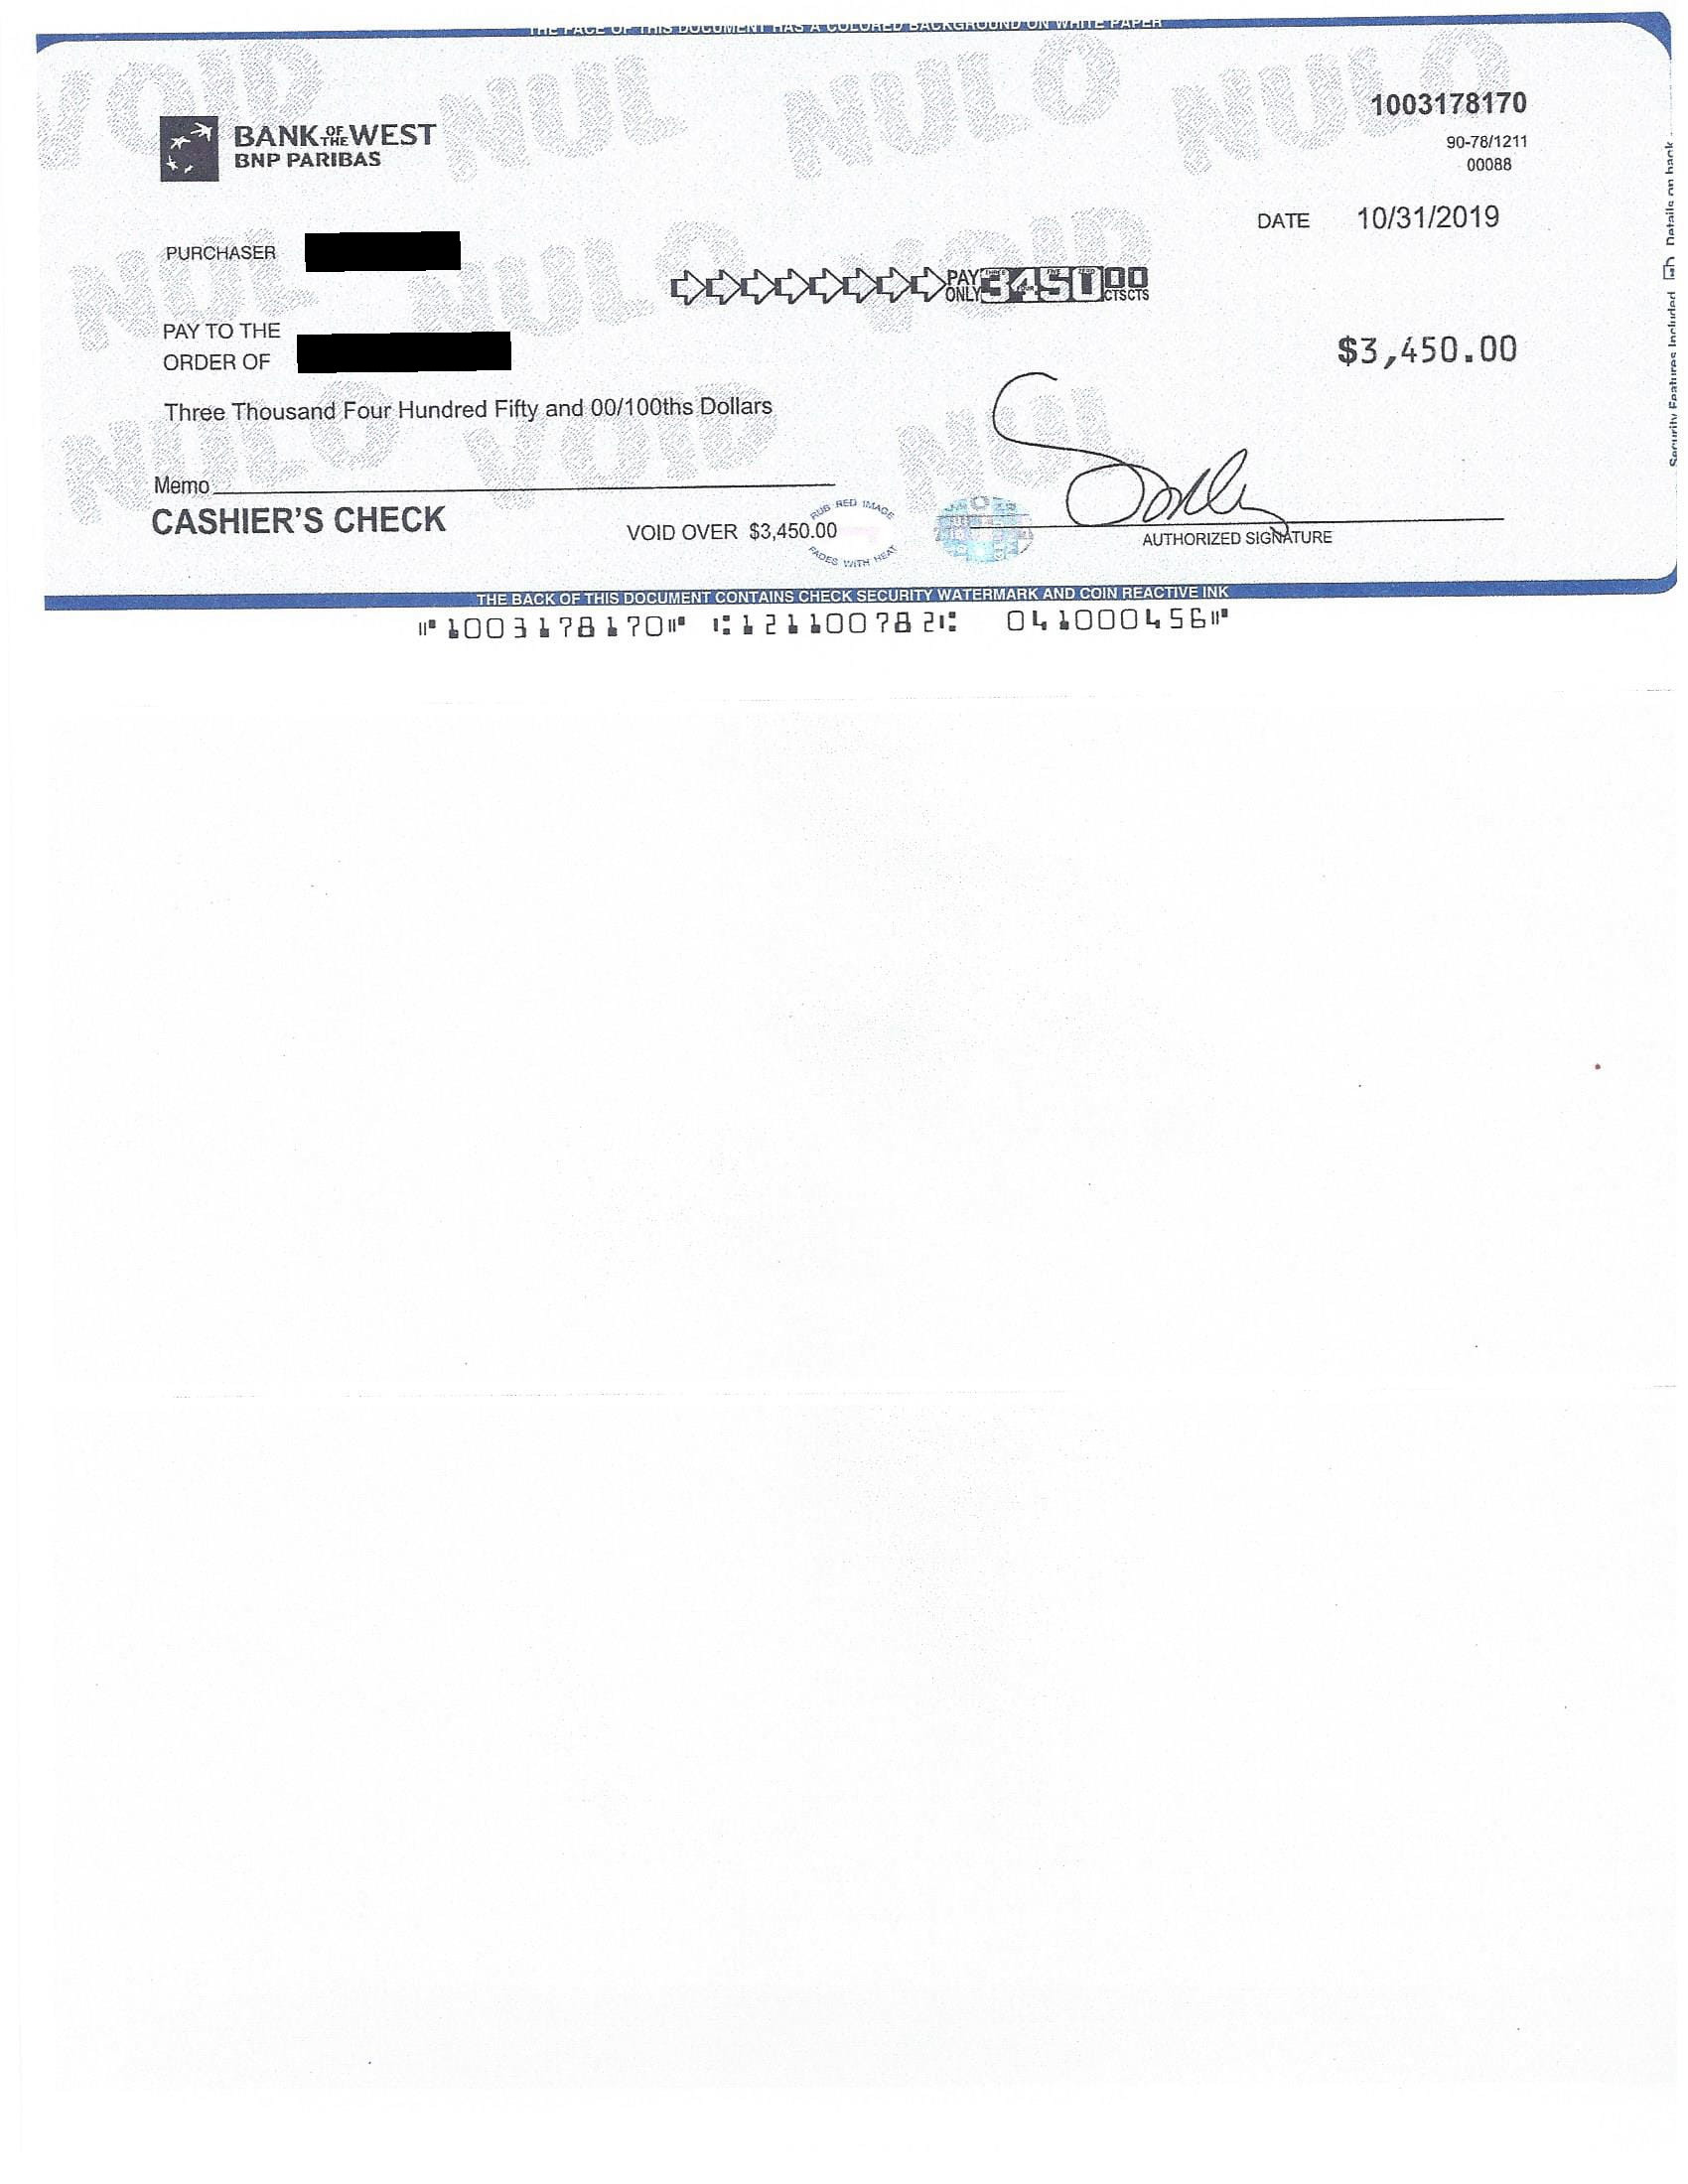 Mail Scam Materials - Fraudulent Check